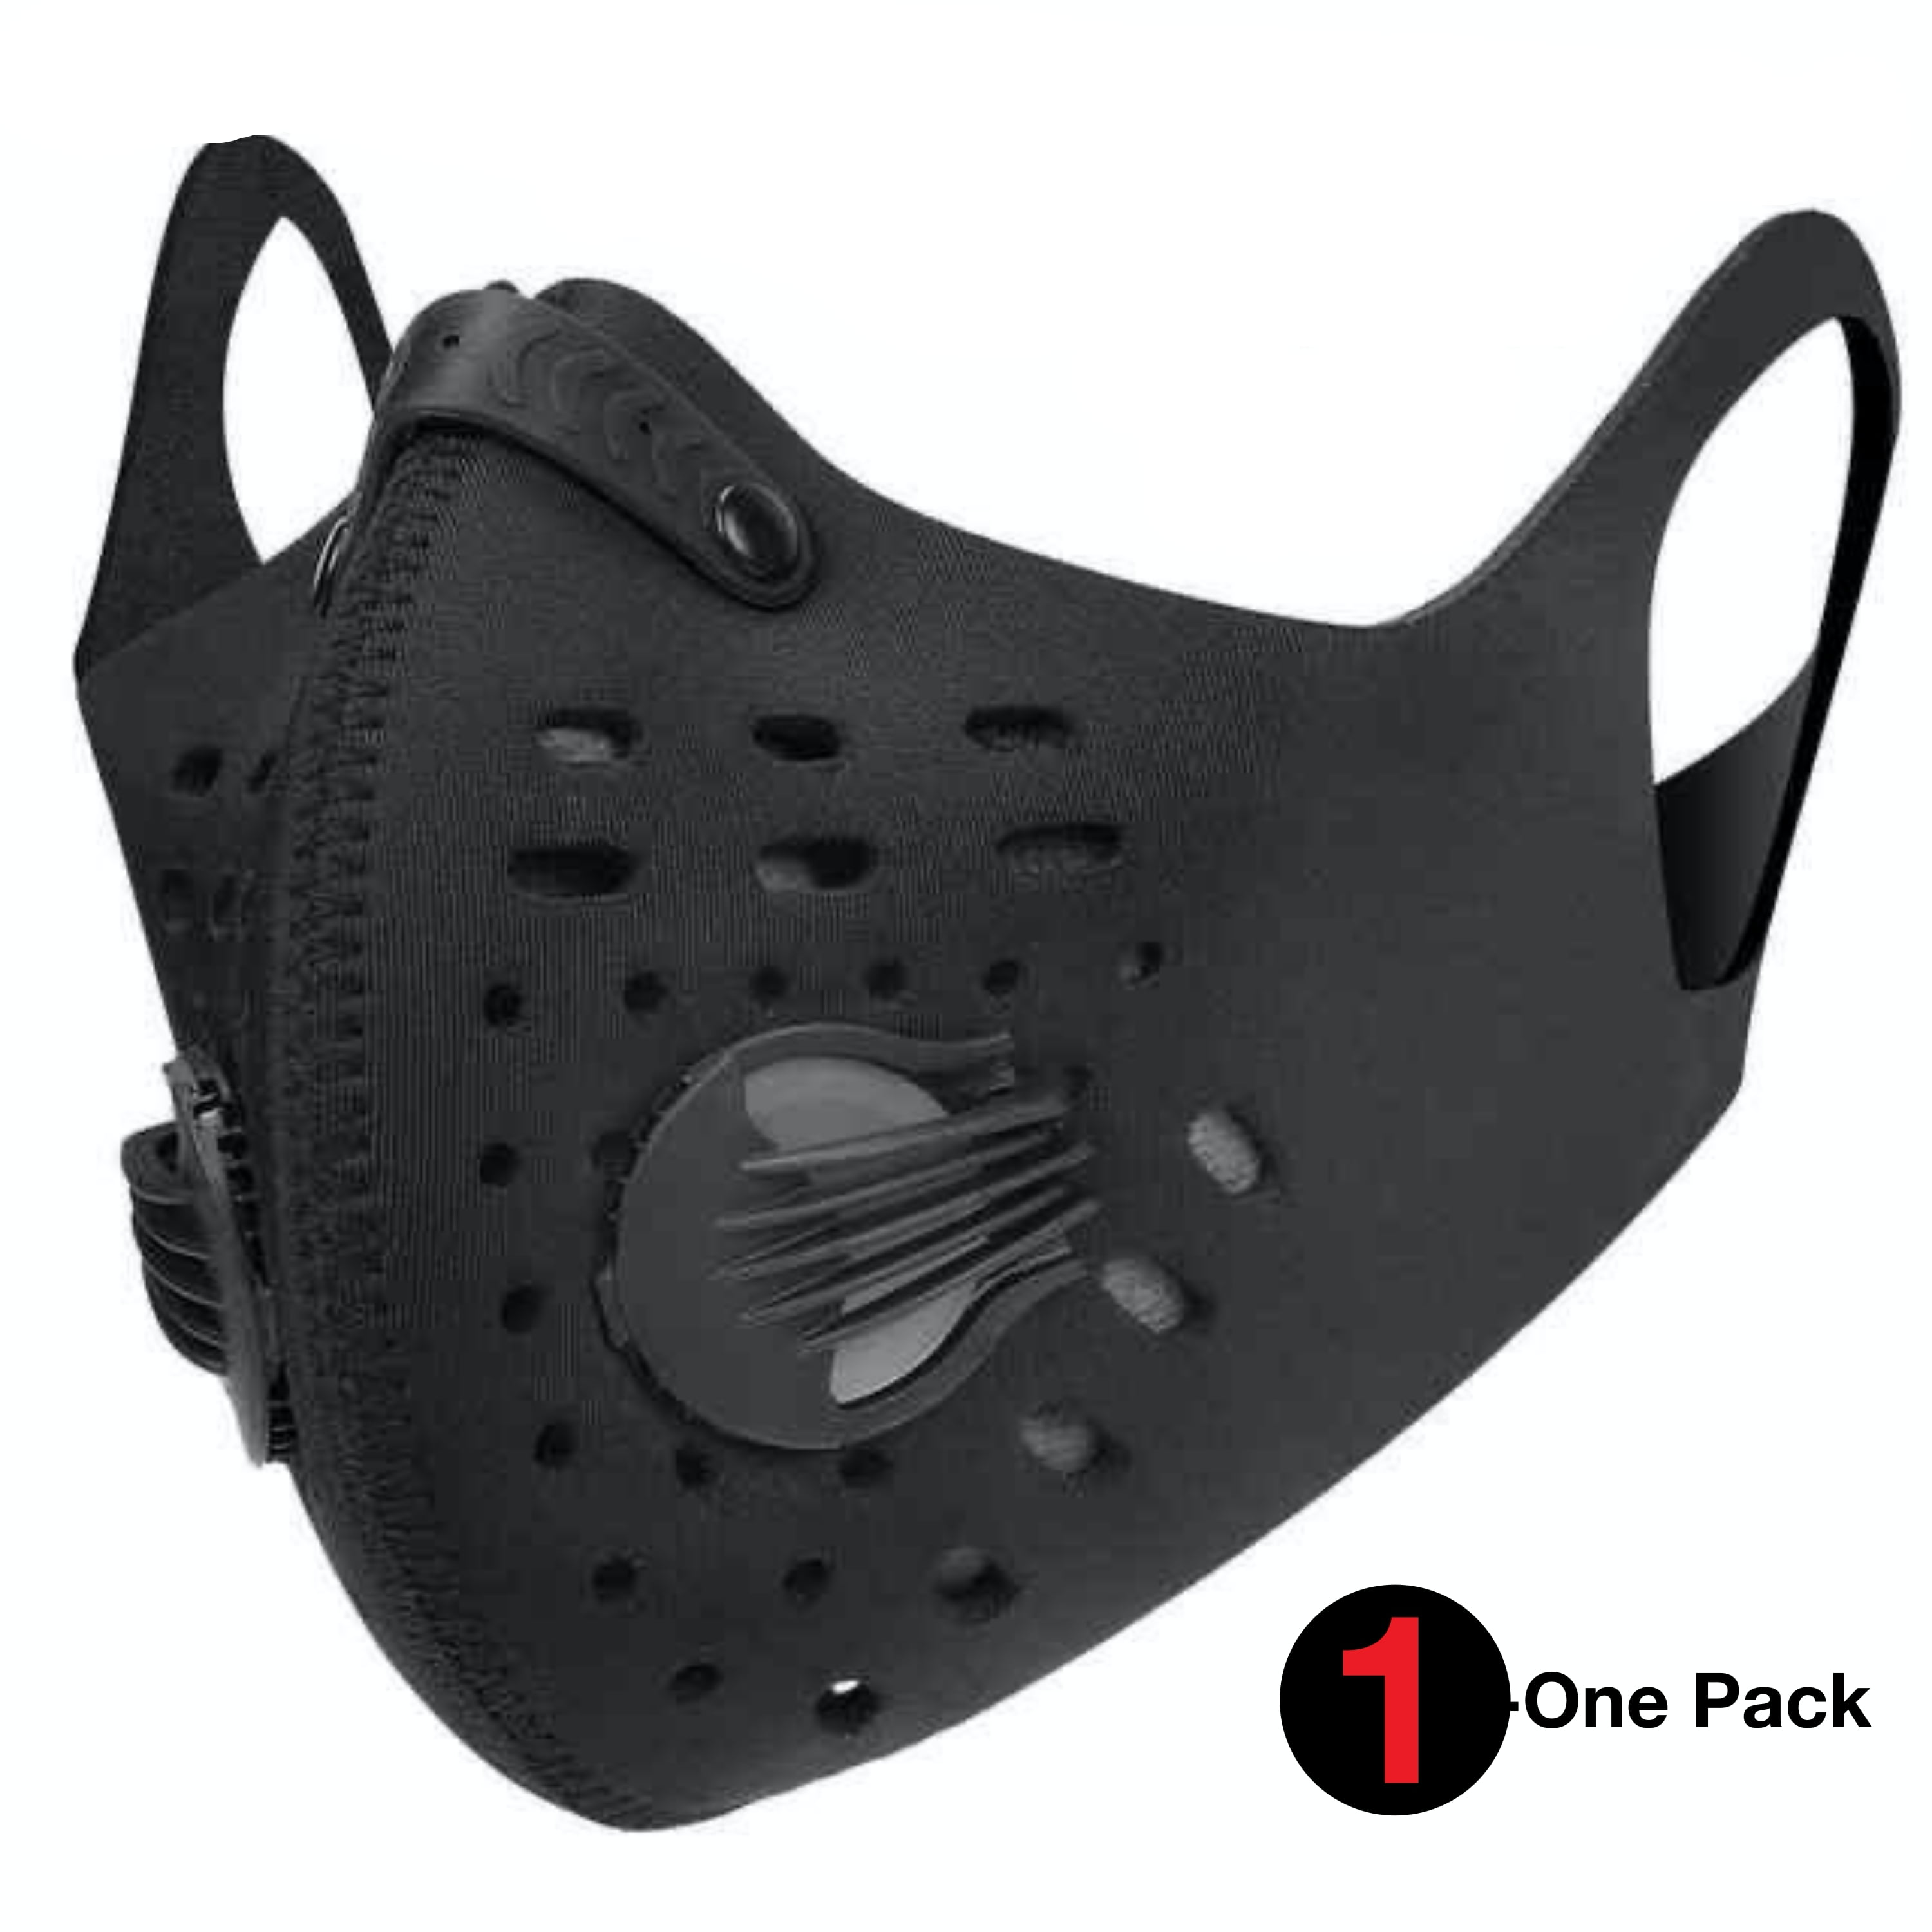 Cycling Protective Face Mask Face Cover Haze Fog Mouth Mask+Filter Valves Utilit